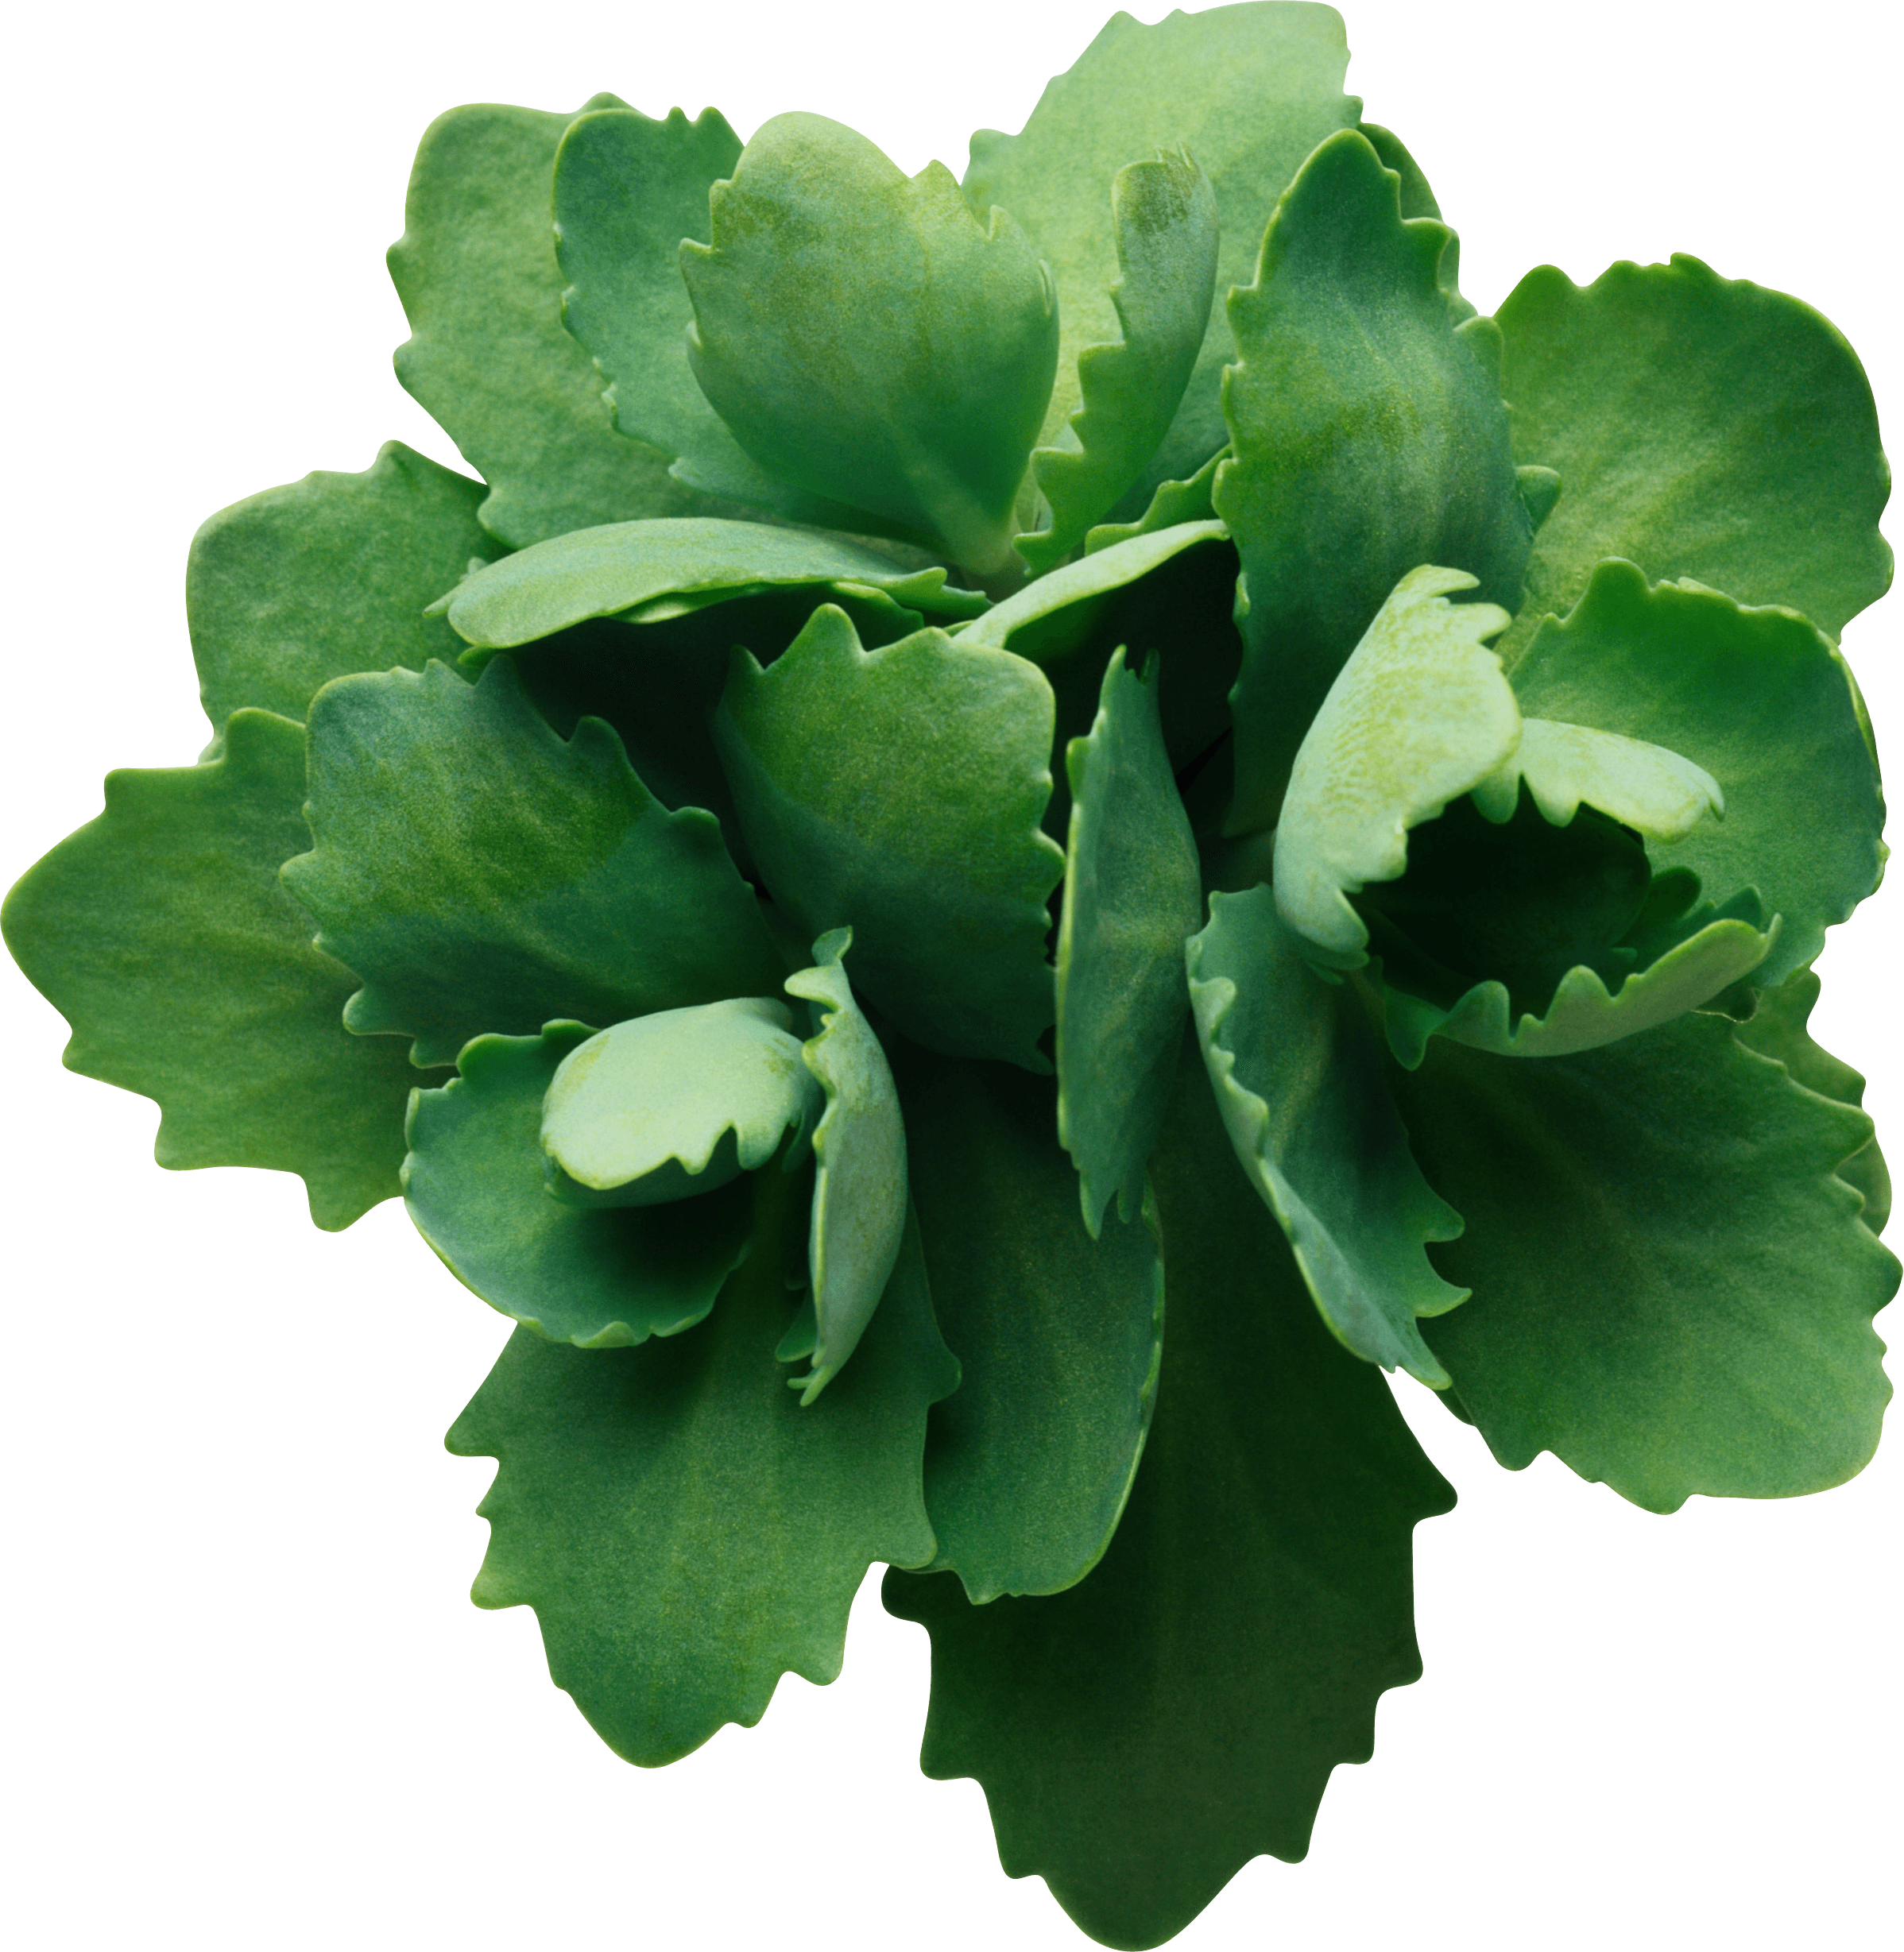 plant with green leaves growing on it png #9873